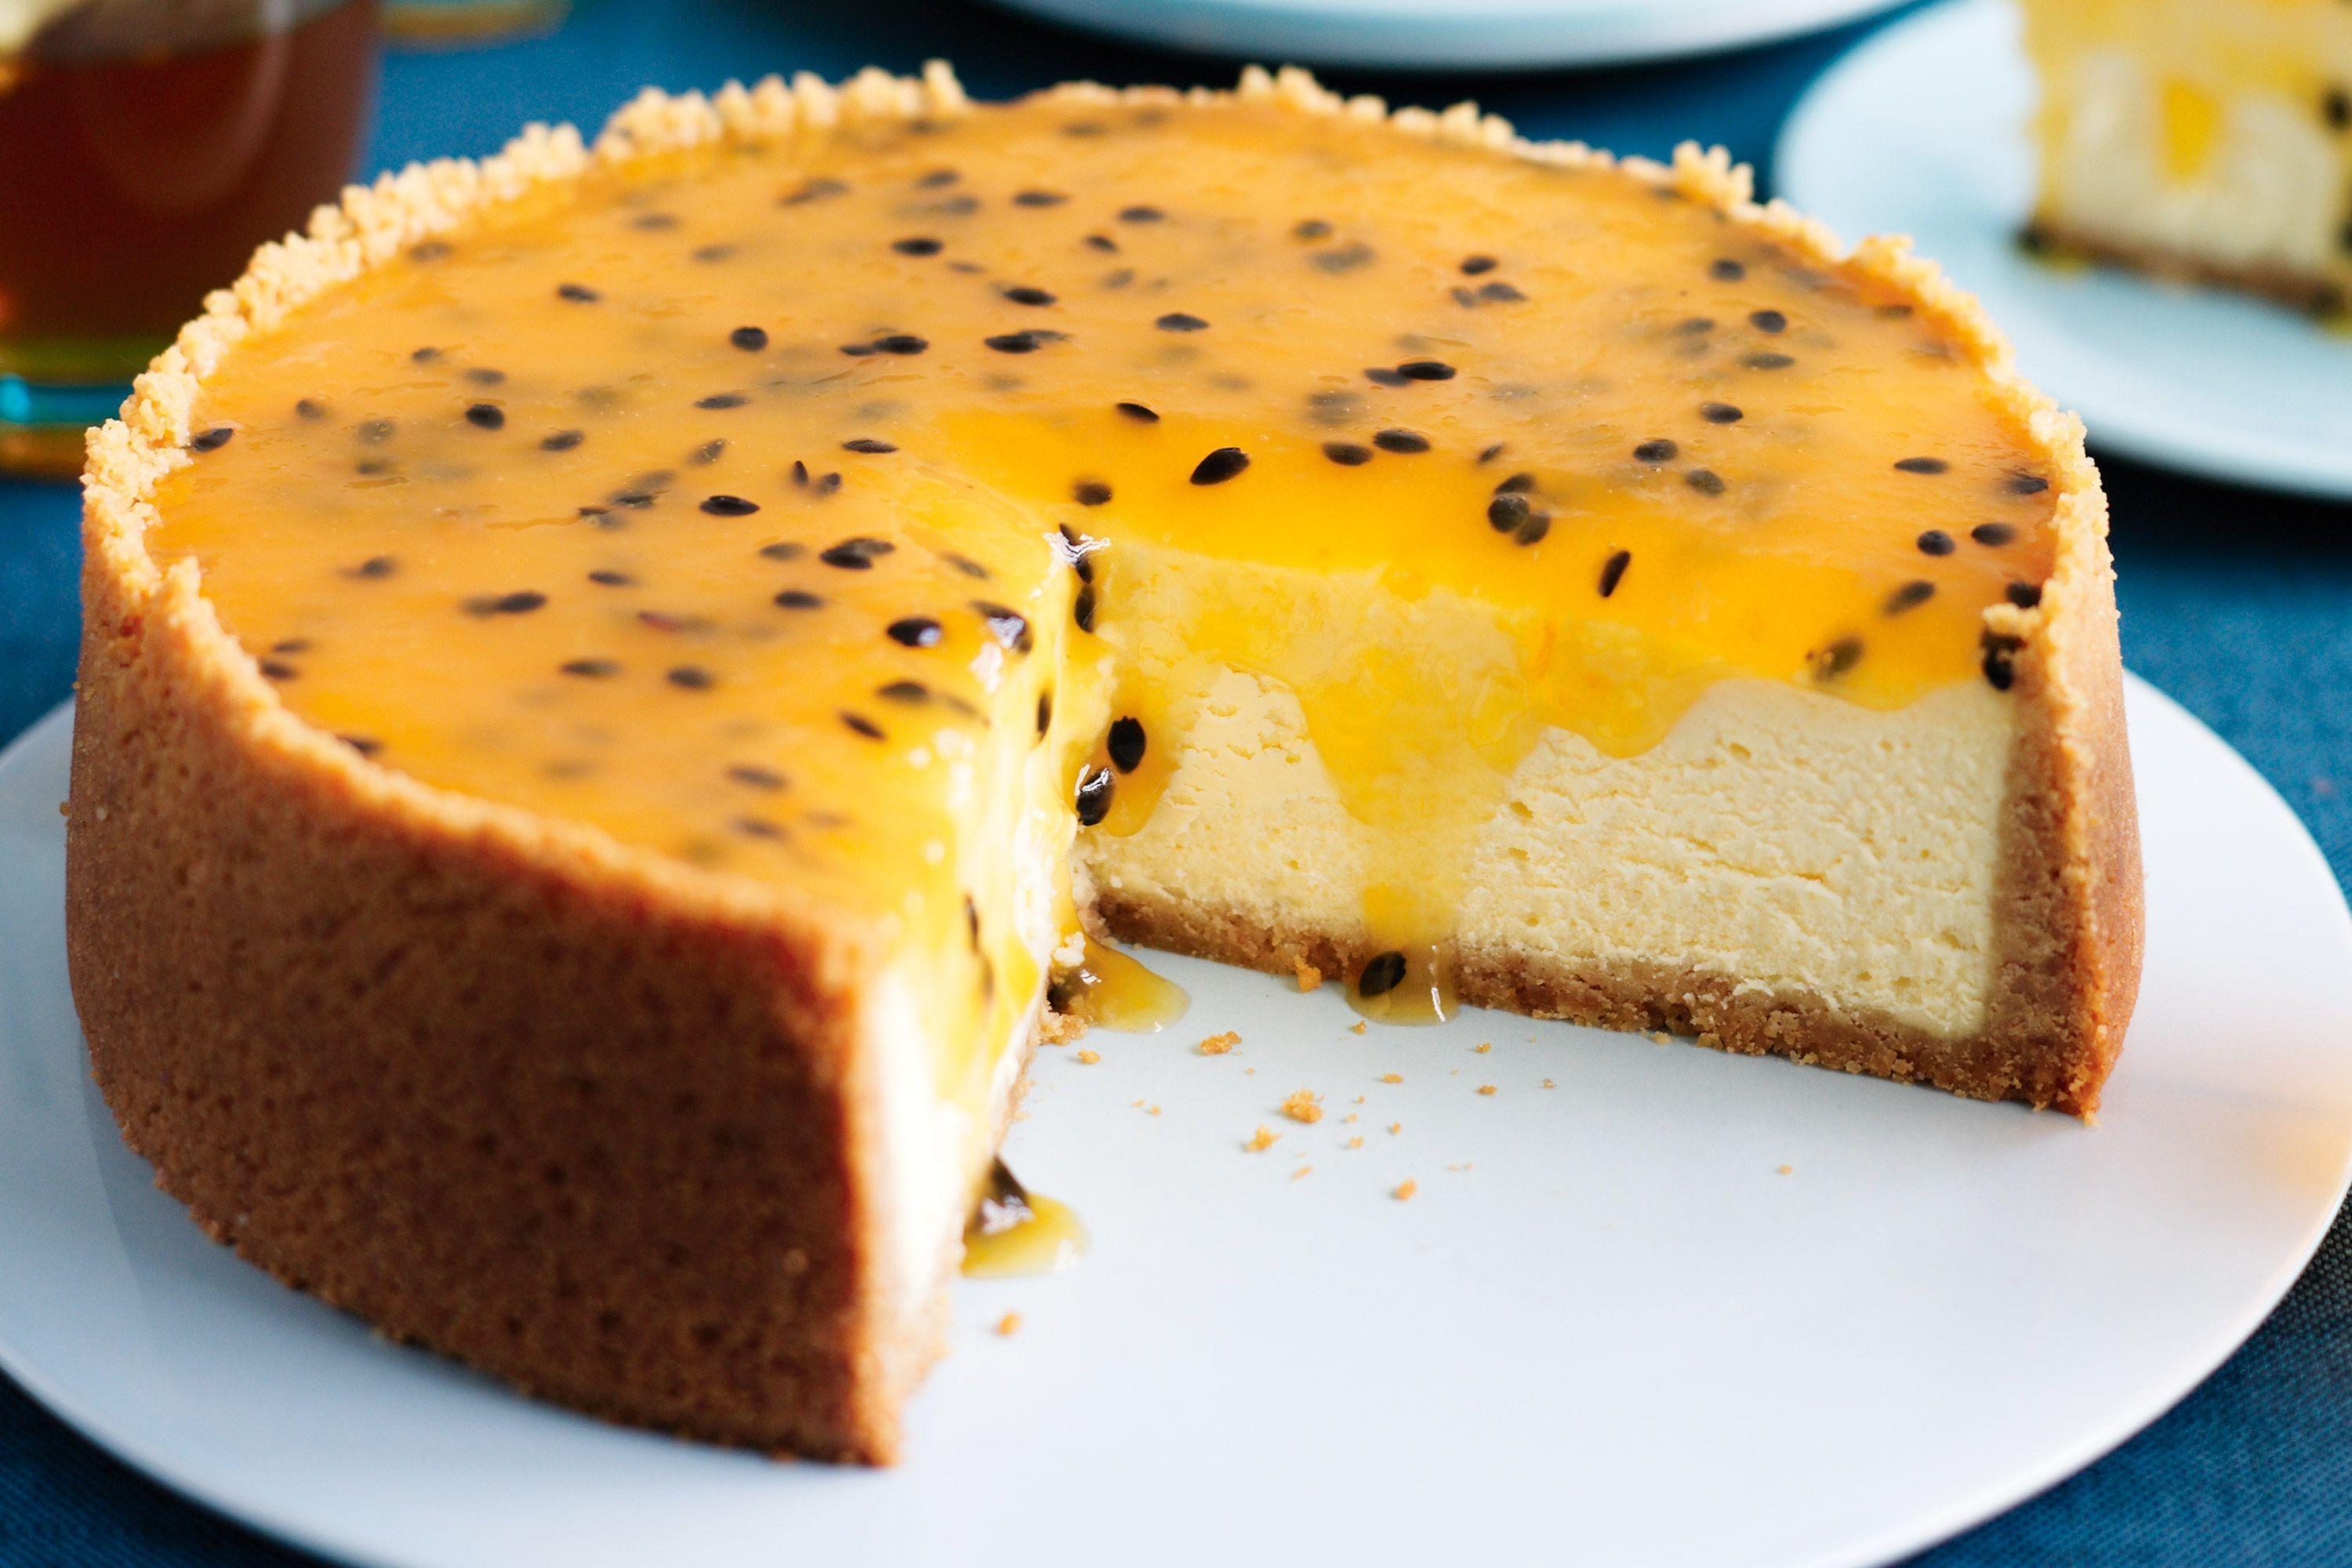 Cakes image Passionfruit Cheesecake HD wallpaper and background